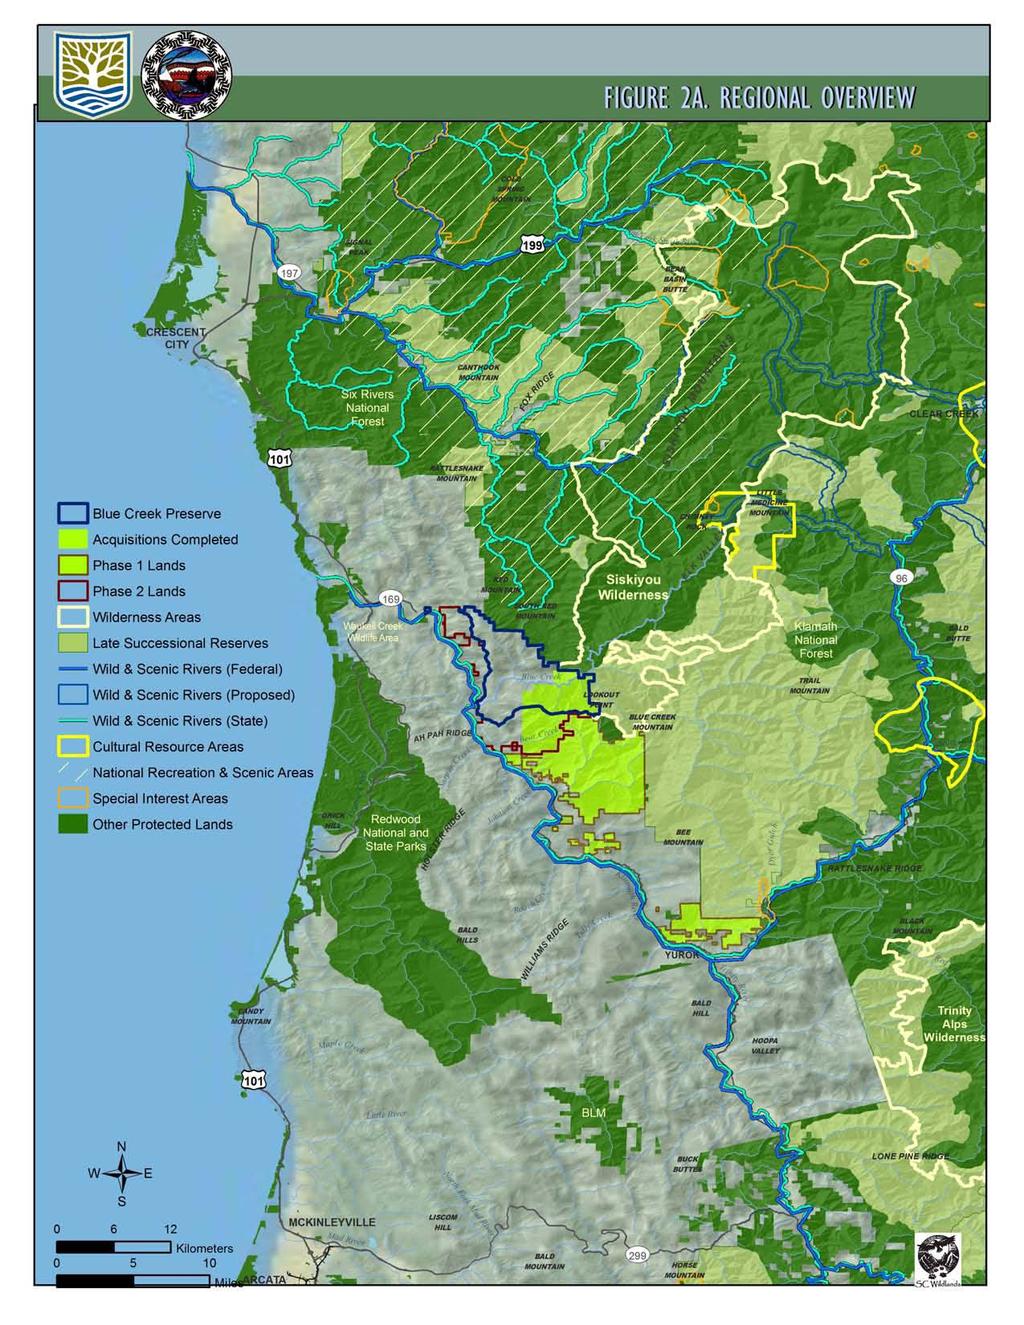 YUROK RESERVATION LOWER KLAMATH RIVER CALIFORNIA 44 miles long Approximately 1 mile on each bank Trinity River Confluence to